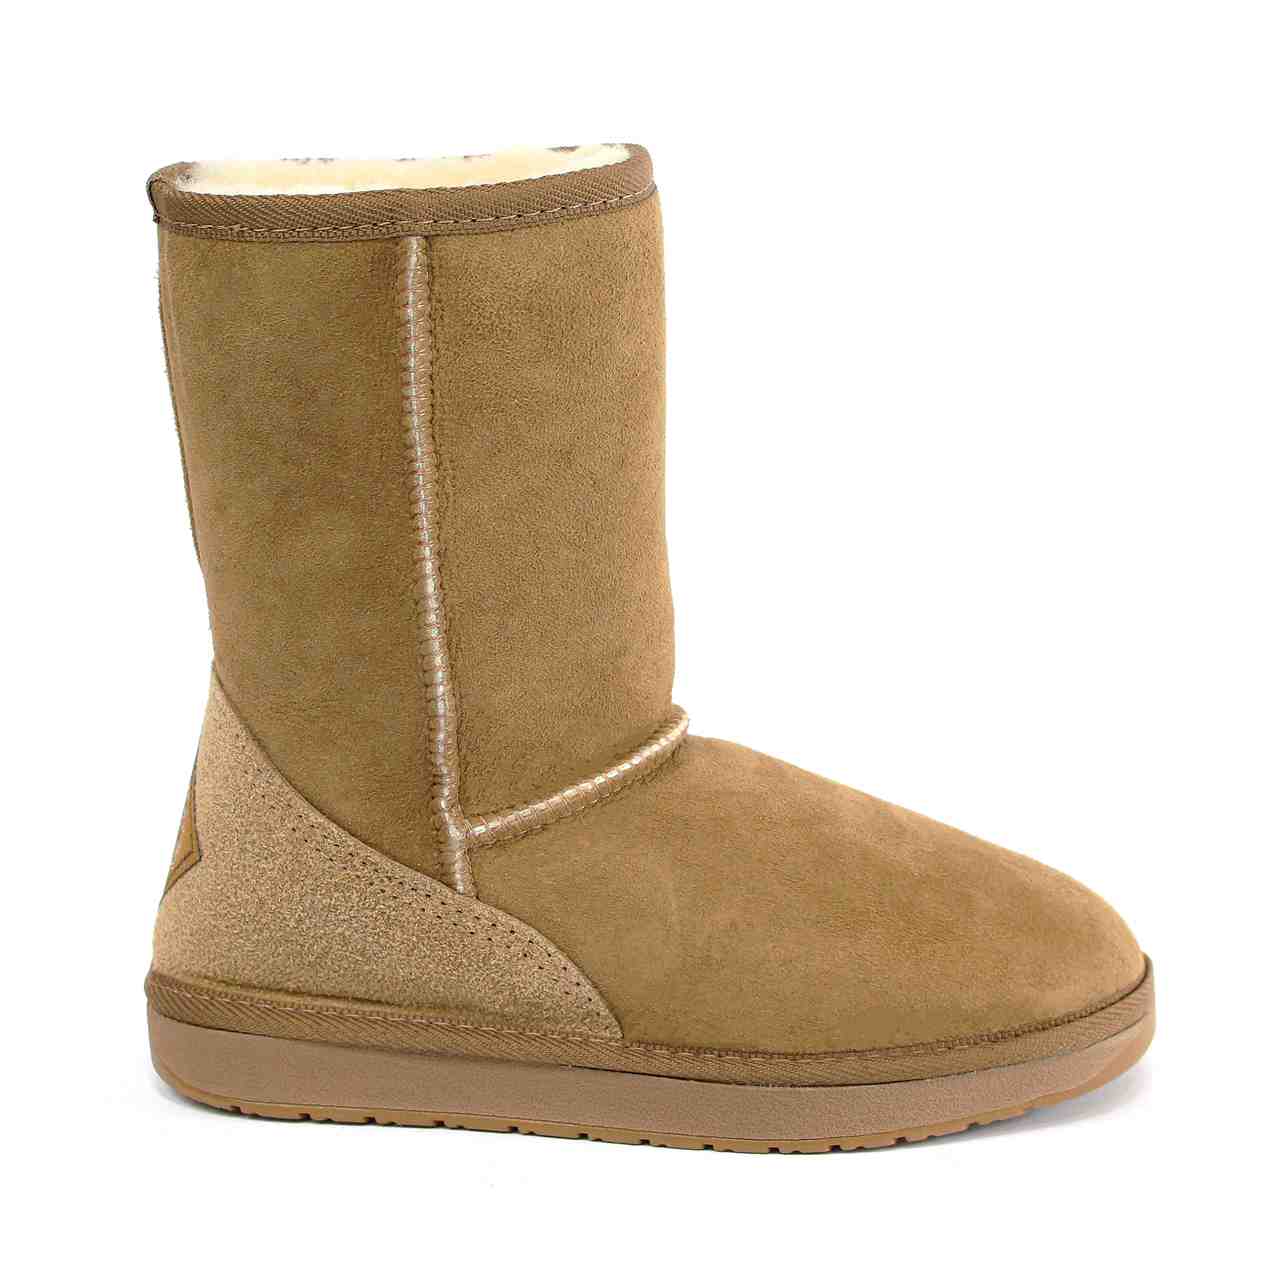 3/4 Classic Ugg Boots (Chestnut colour)